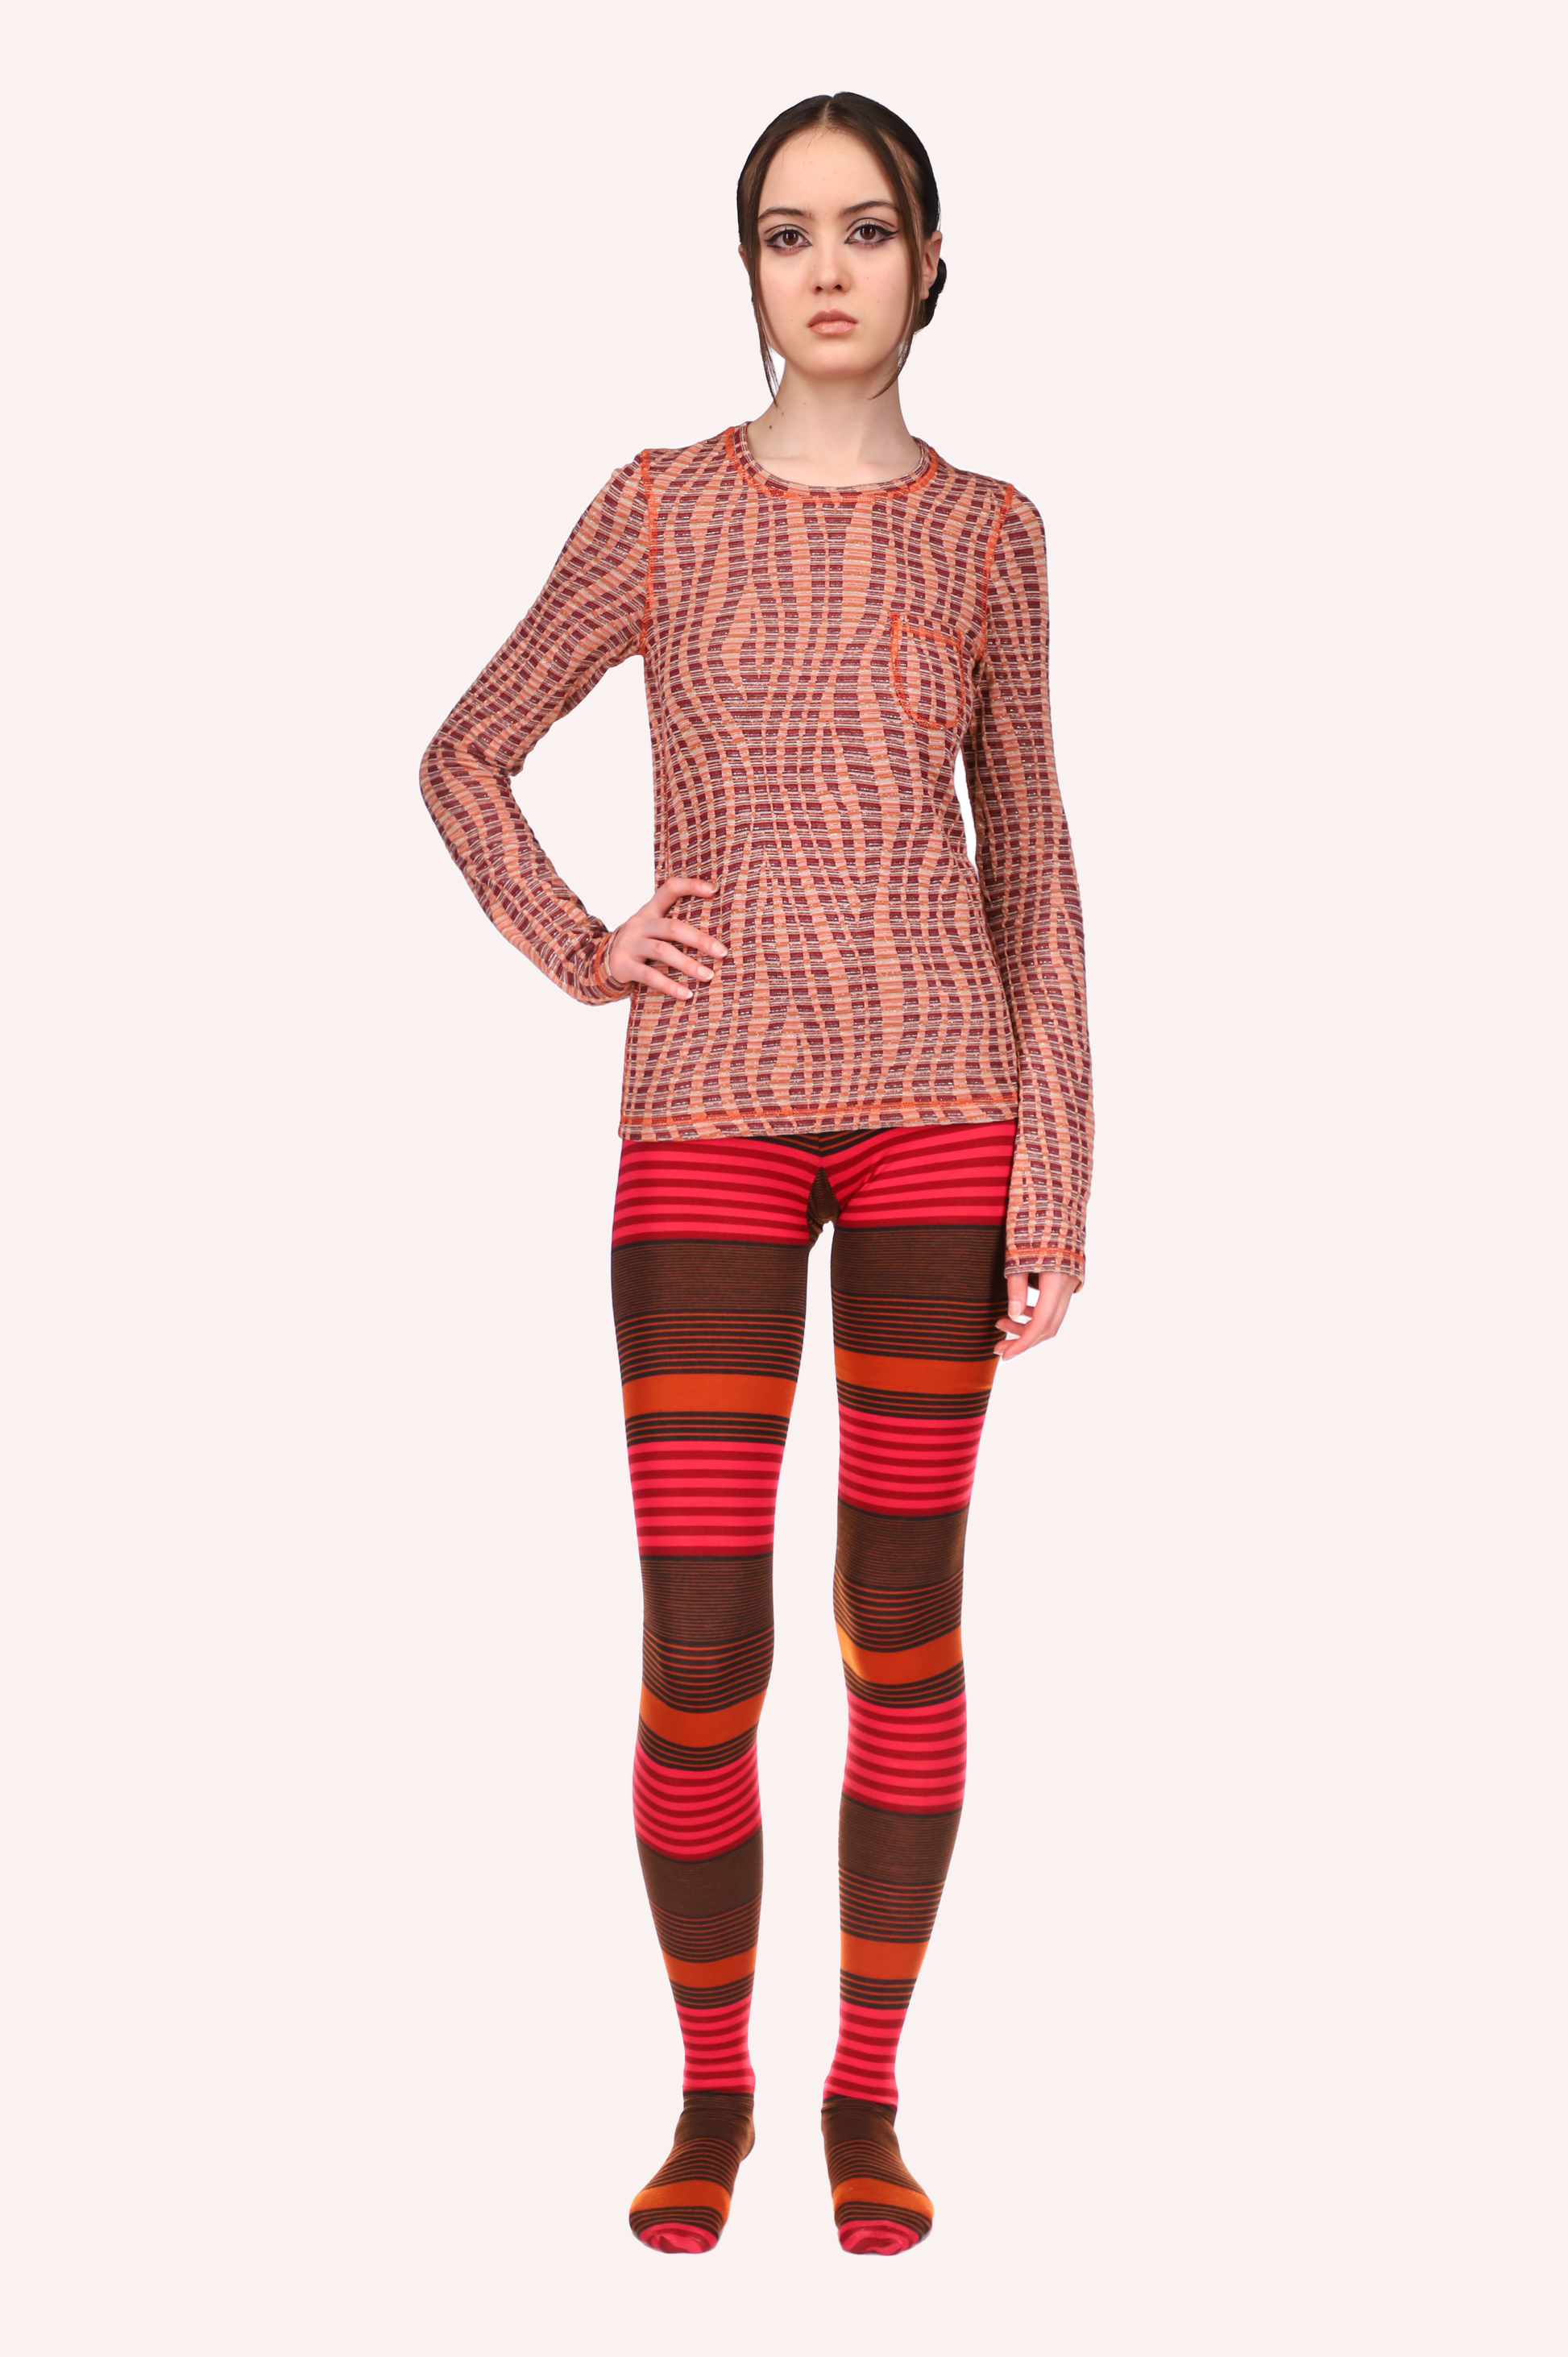 Mod Stripe Knit Tights Orange, the design of these tights shapes and slims the legs.